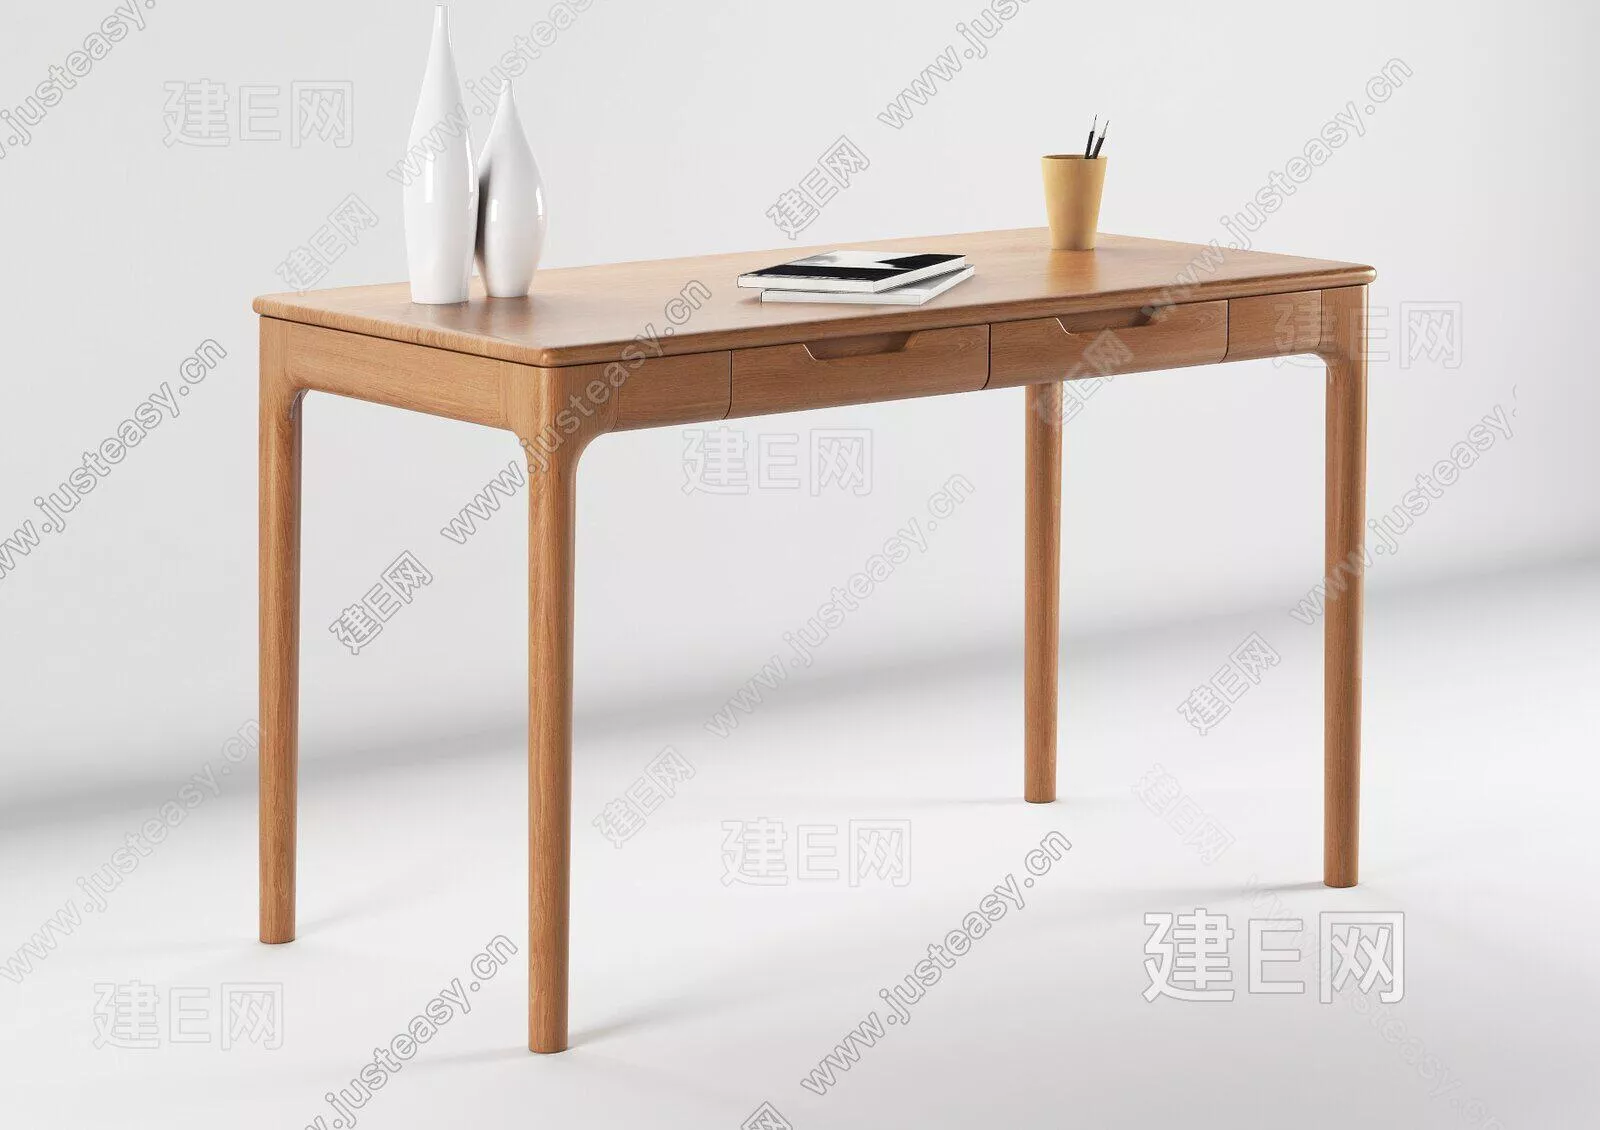 CHINESE DINING TABLE SET - SKETCHUP 3D MODEL - ENSCAPE - 111234466